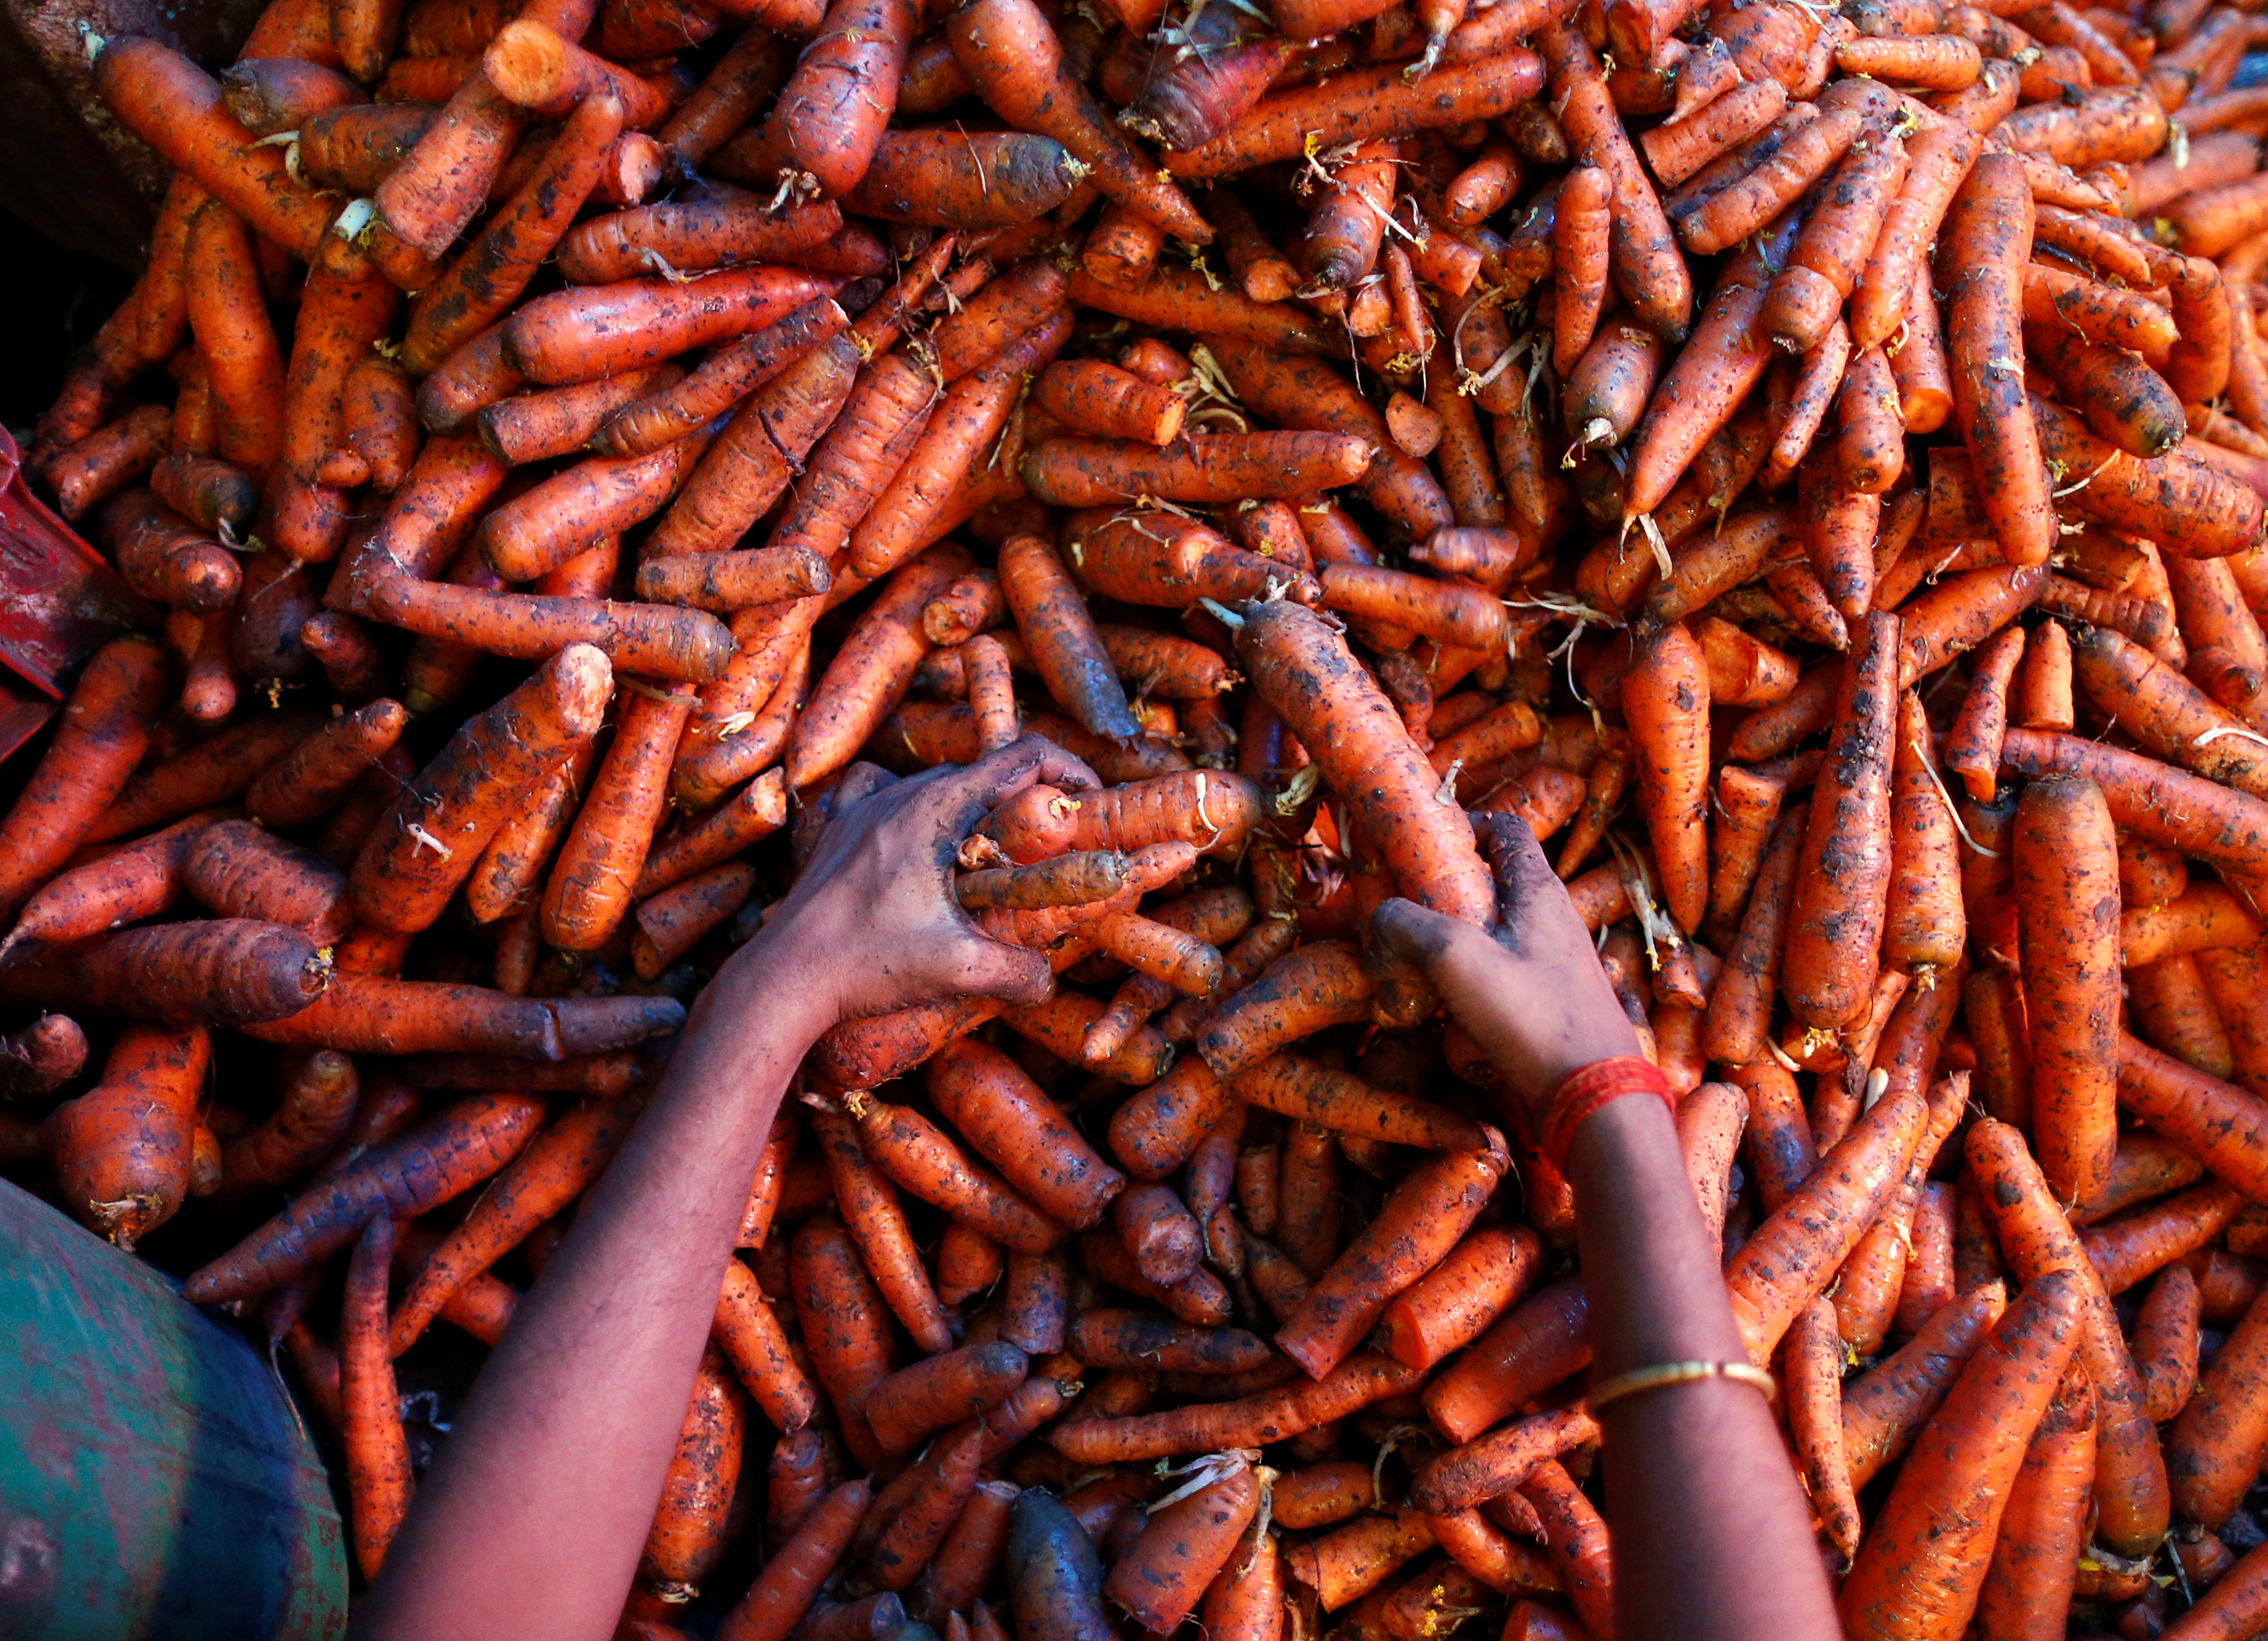 A worker sorts carrots at a wholesale vegetable market in Mumbai